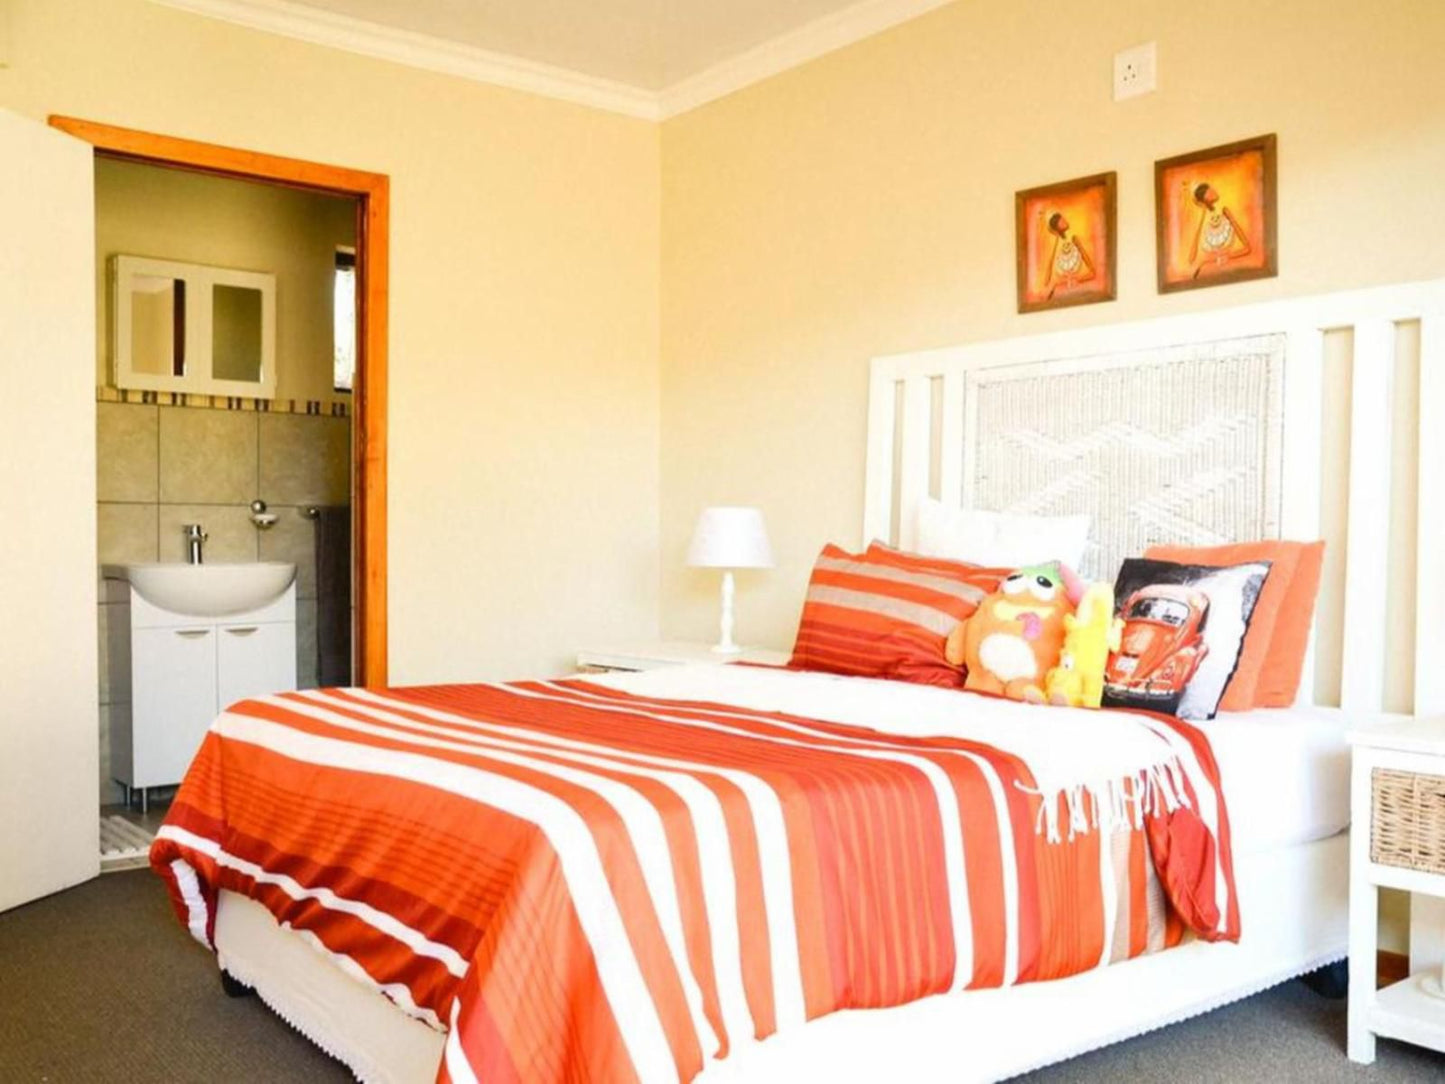 Wille Garden Flair Guesthouse Universitas Bloemfontein Free State South Africa Colorful, Bedroom